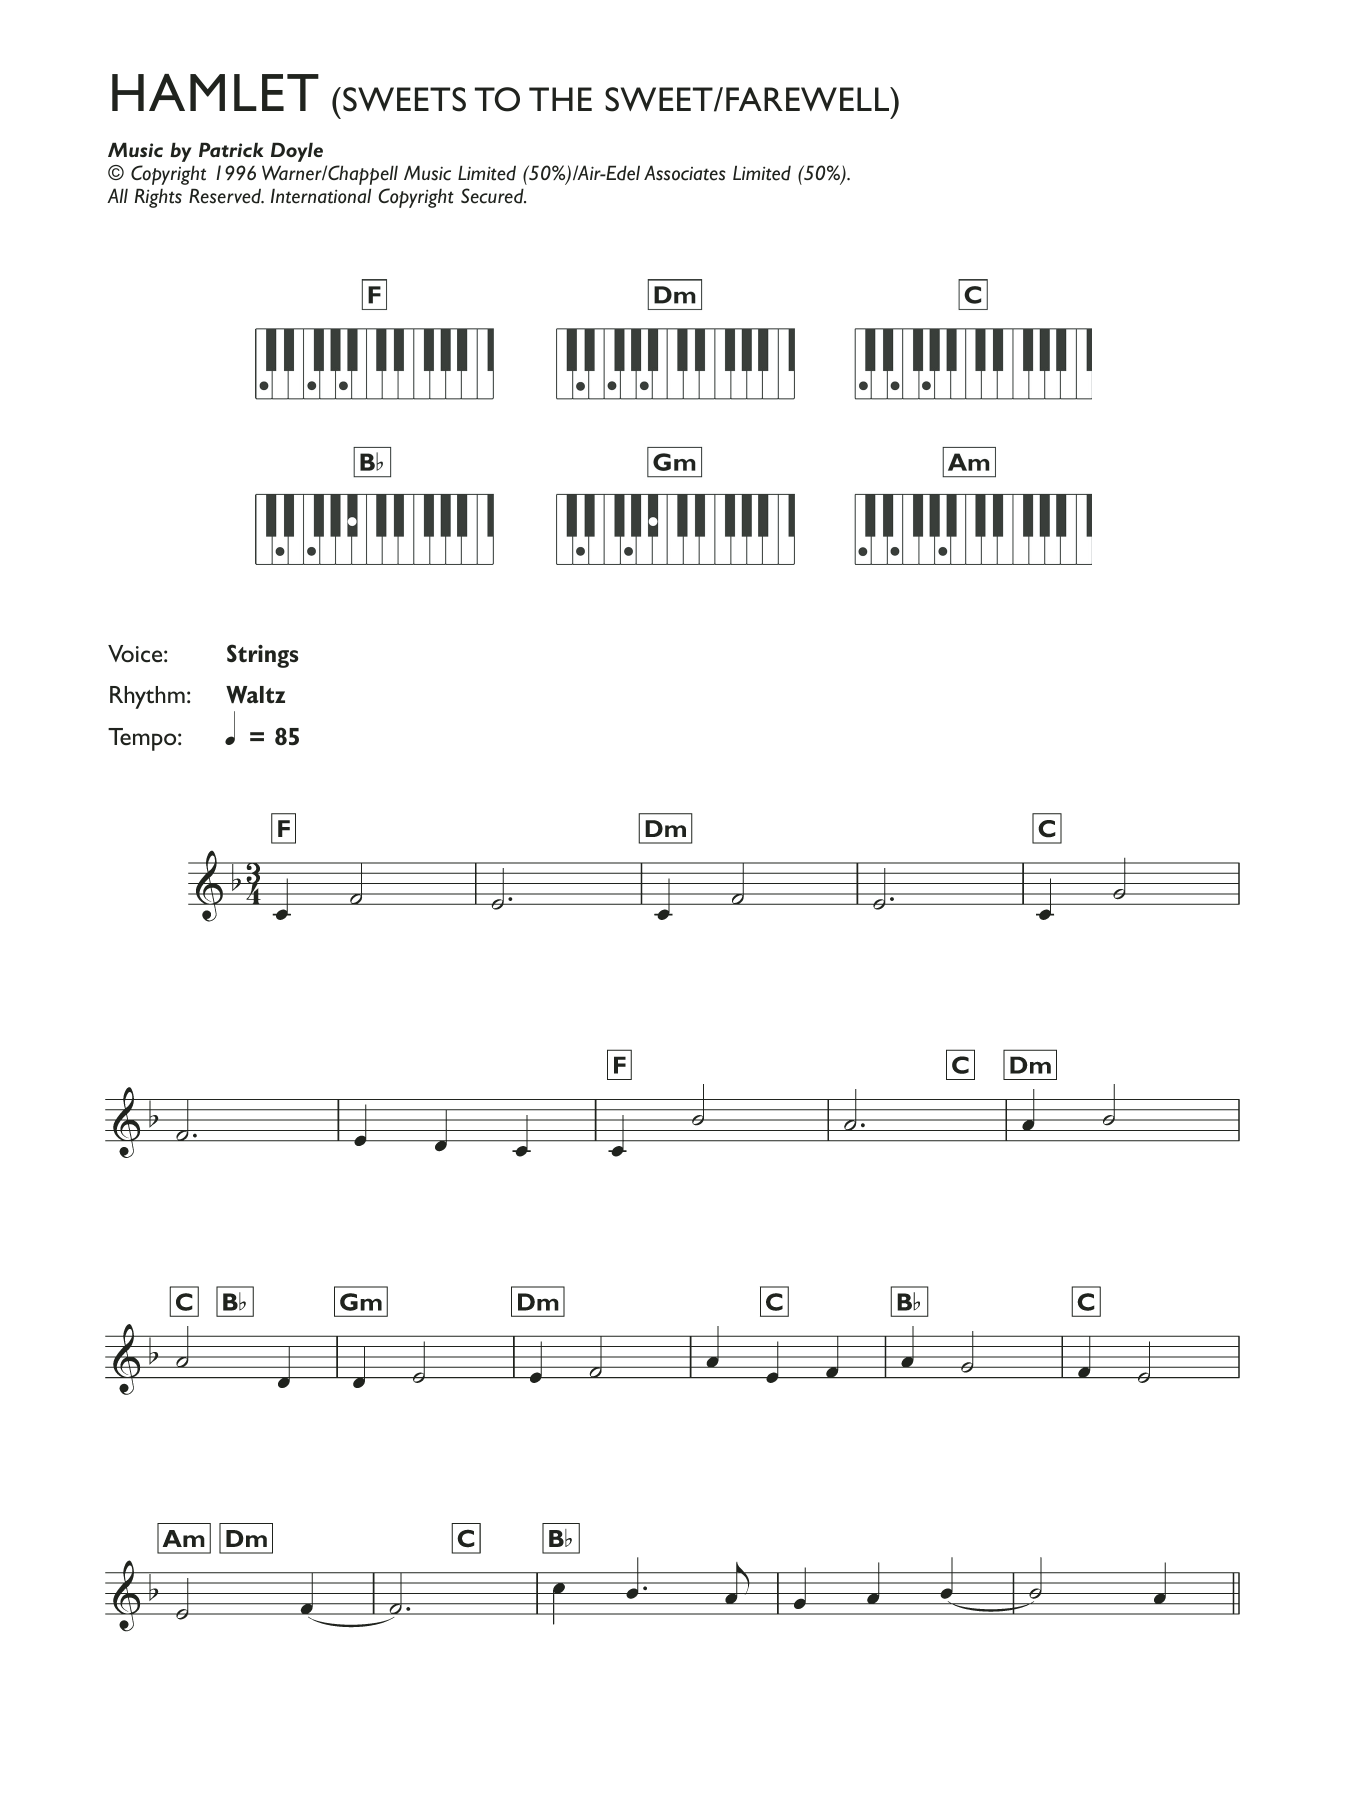 Download Patrick Doyle Sweets To The Sweet - Farewell (from Ha Sheet Music